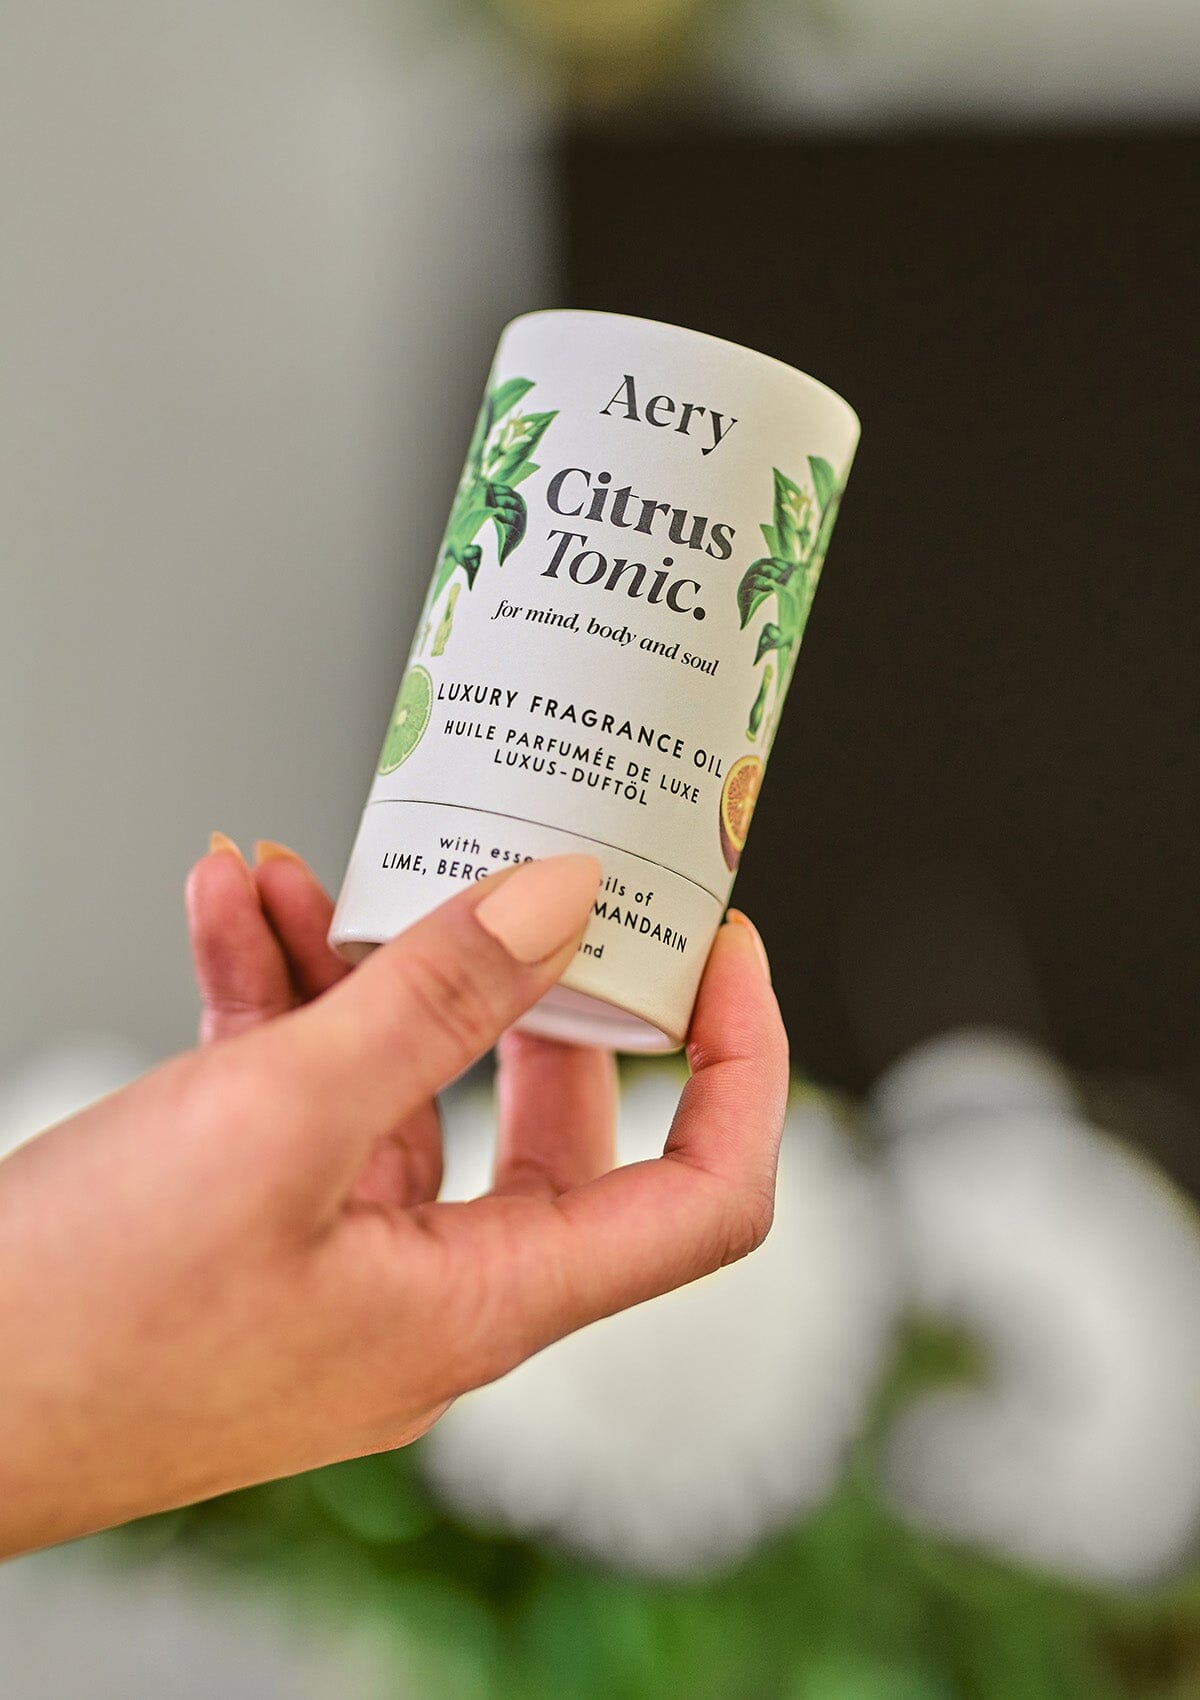 Citrus Tonic fragrance oil product packaging by Aery held in hand 